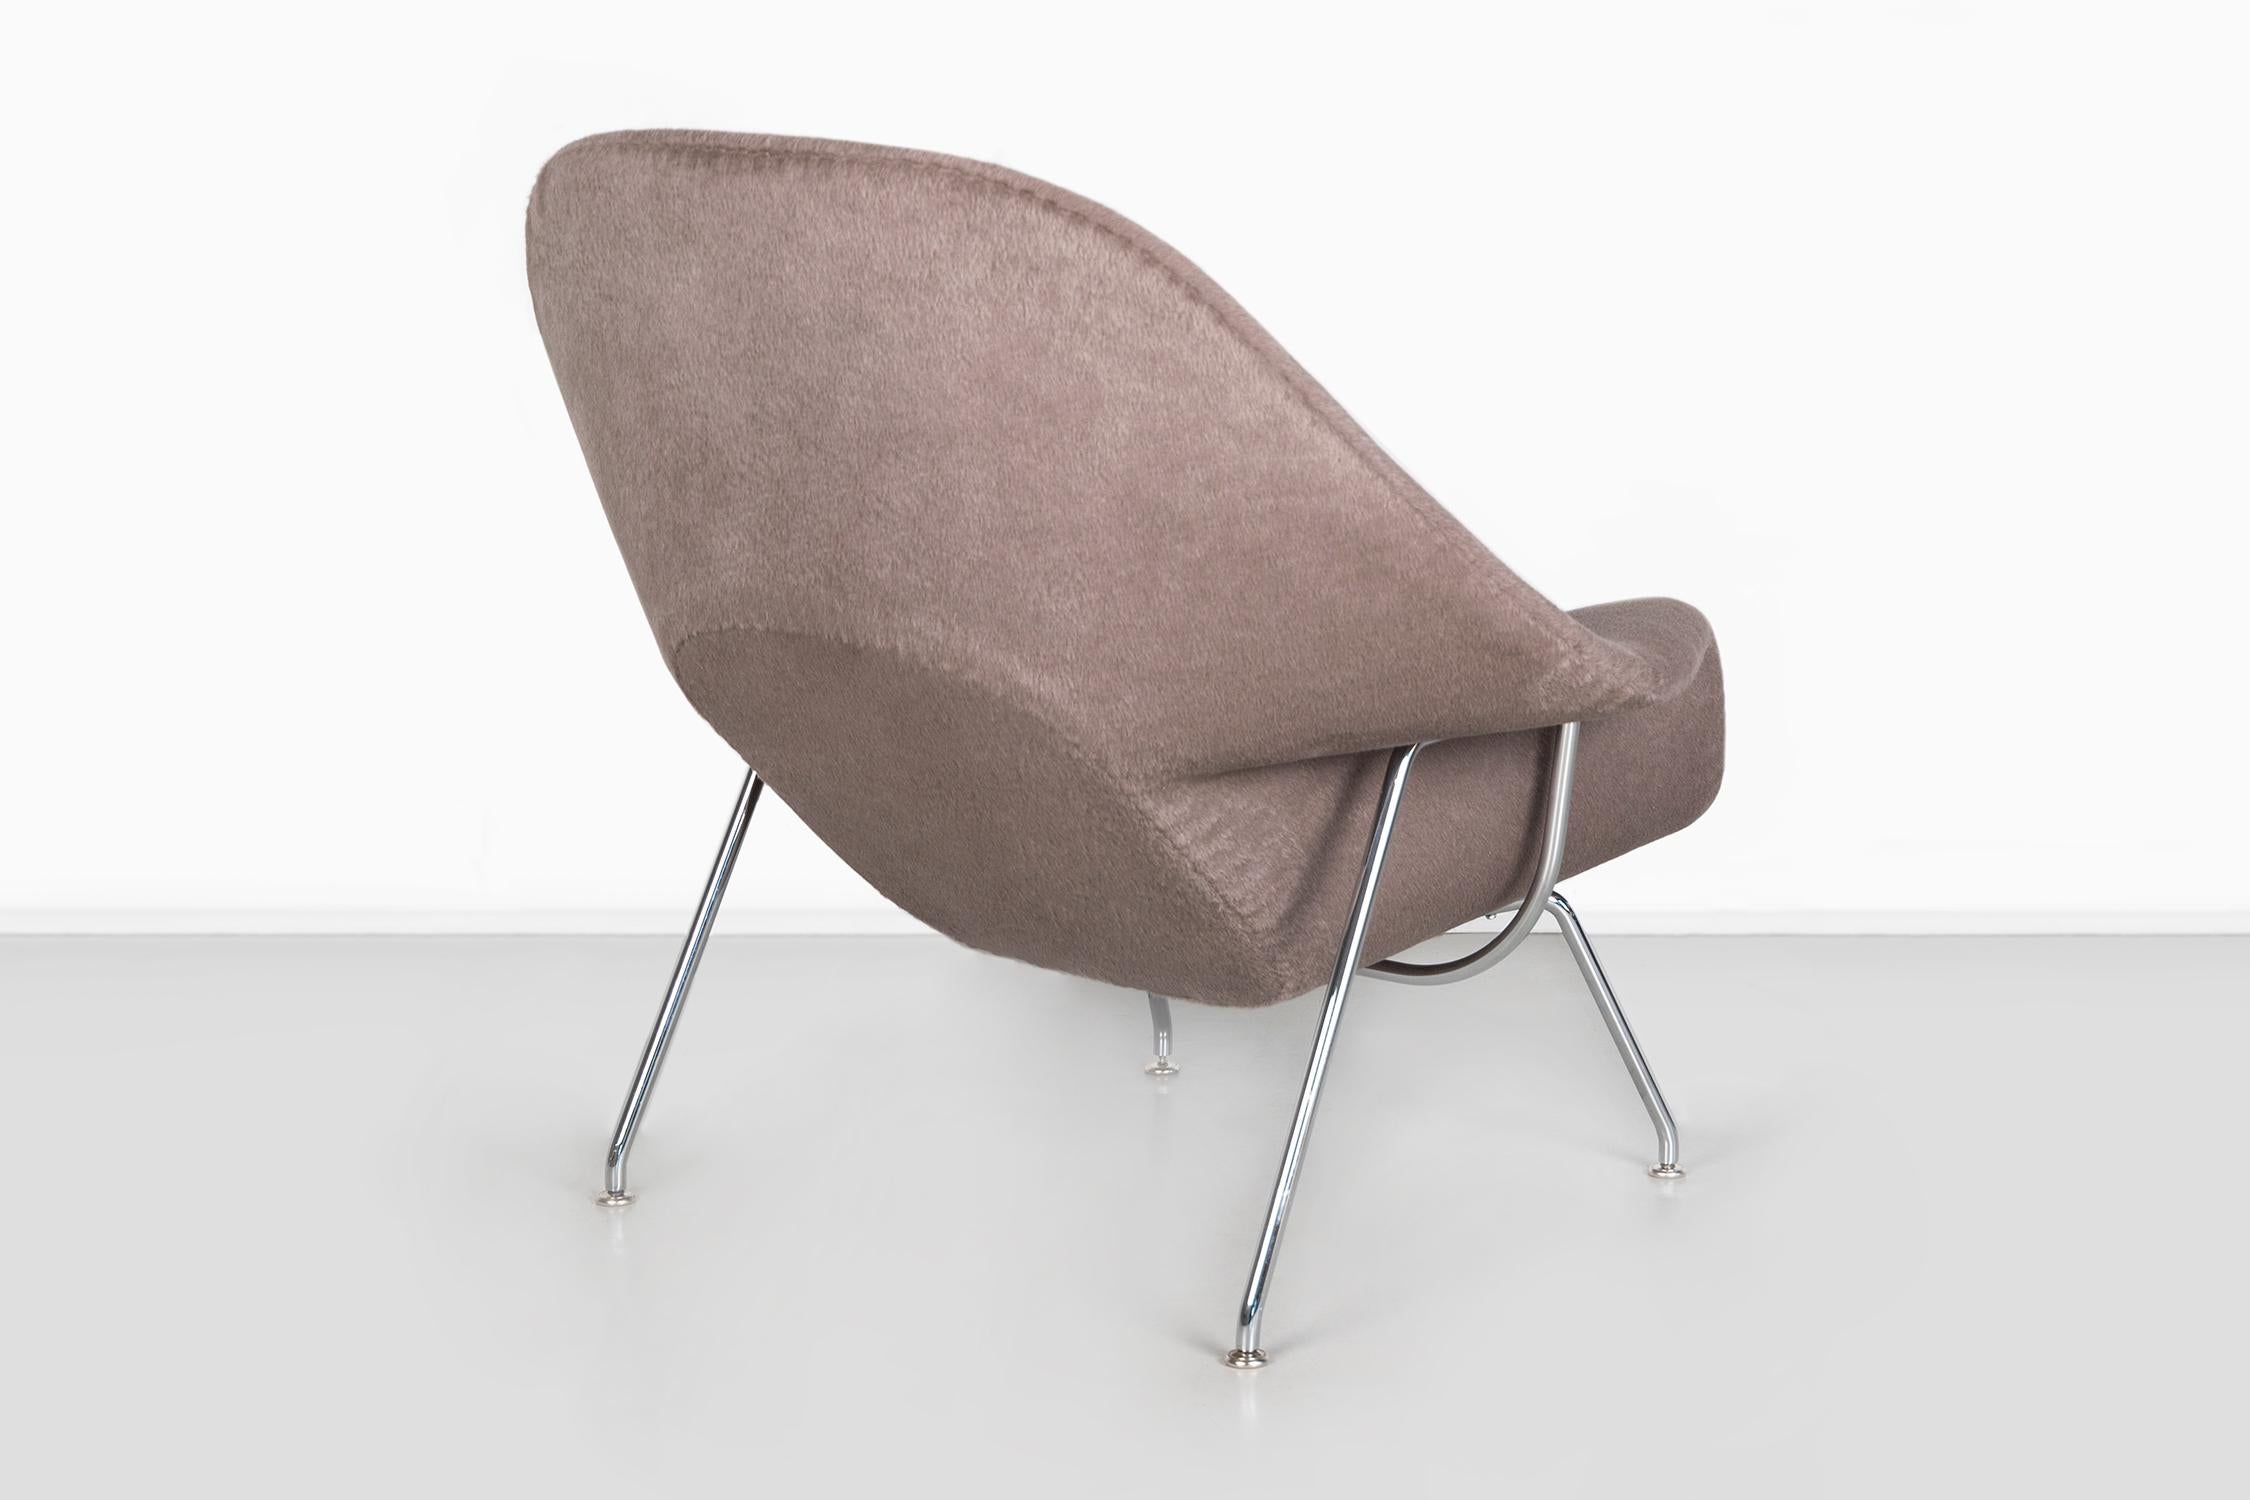 Knoll Medium Womb Chair Upholstered in Alpaca 1